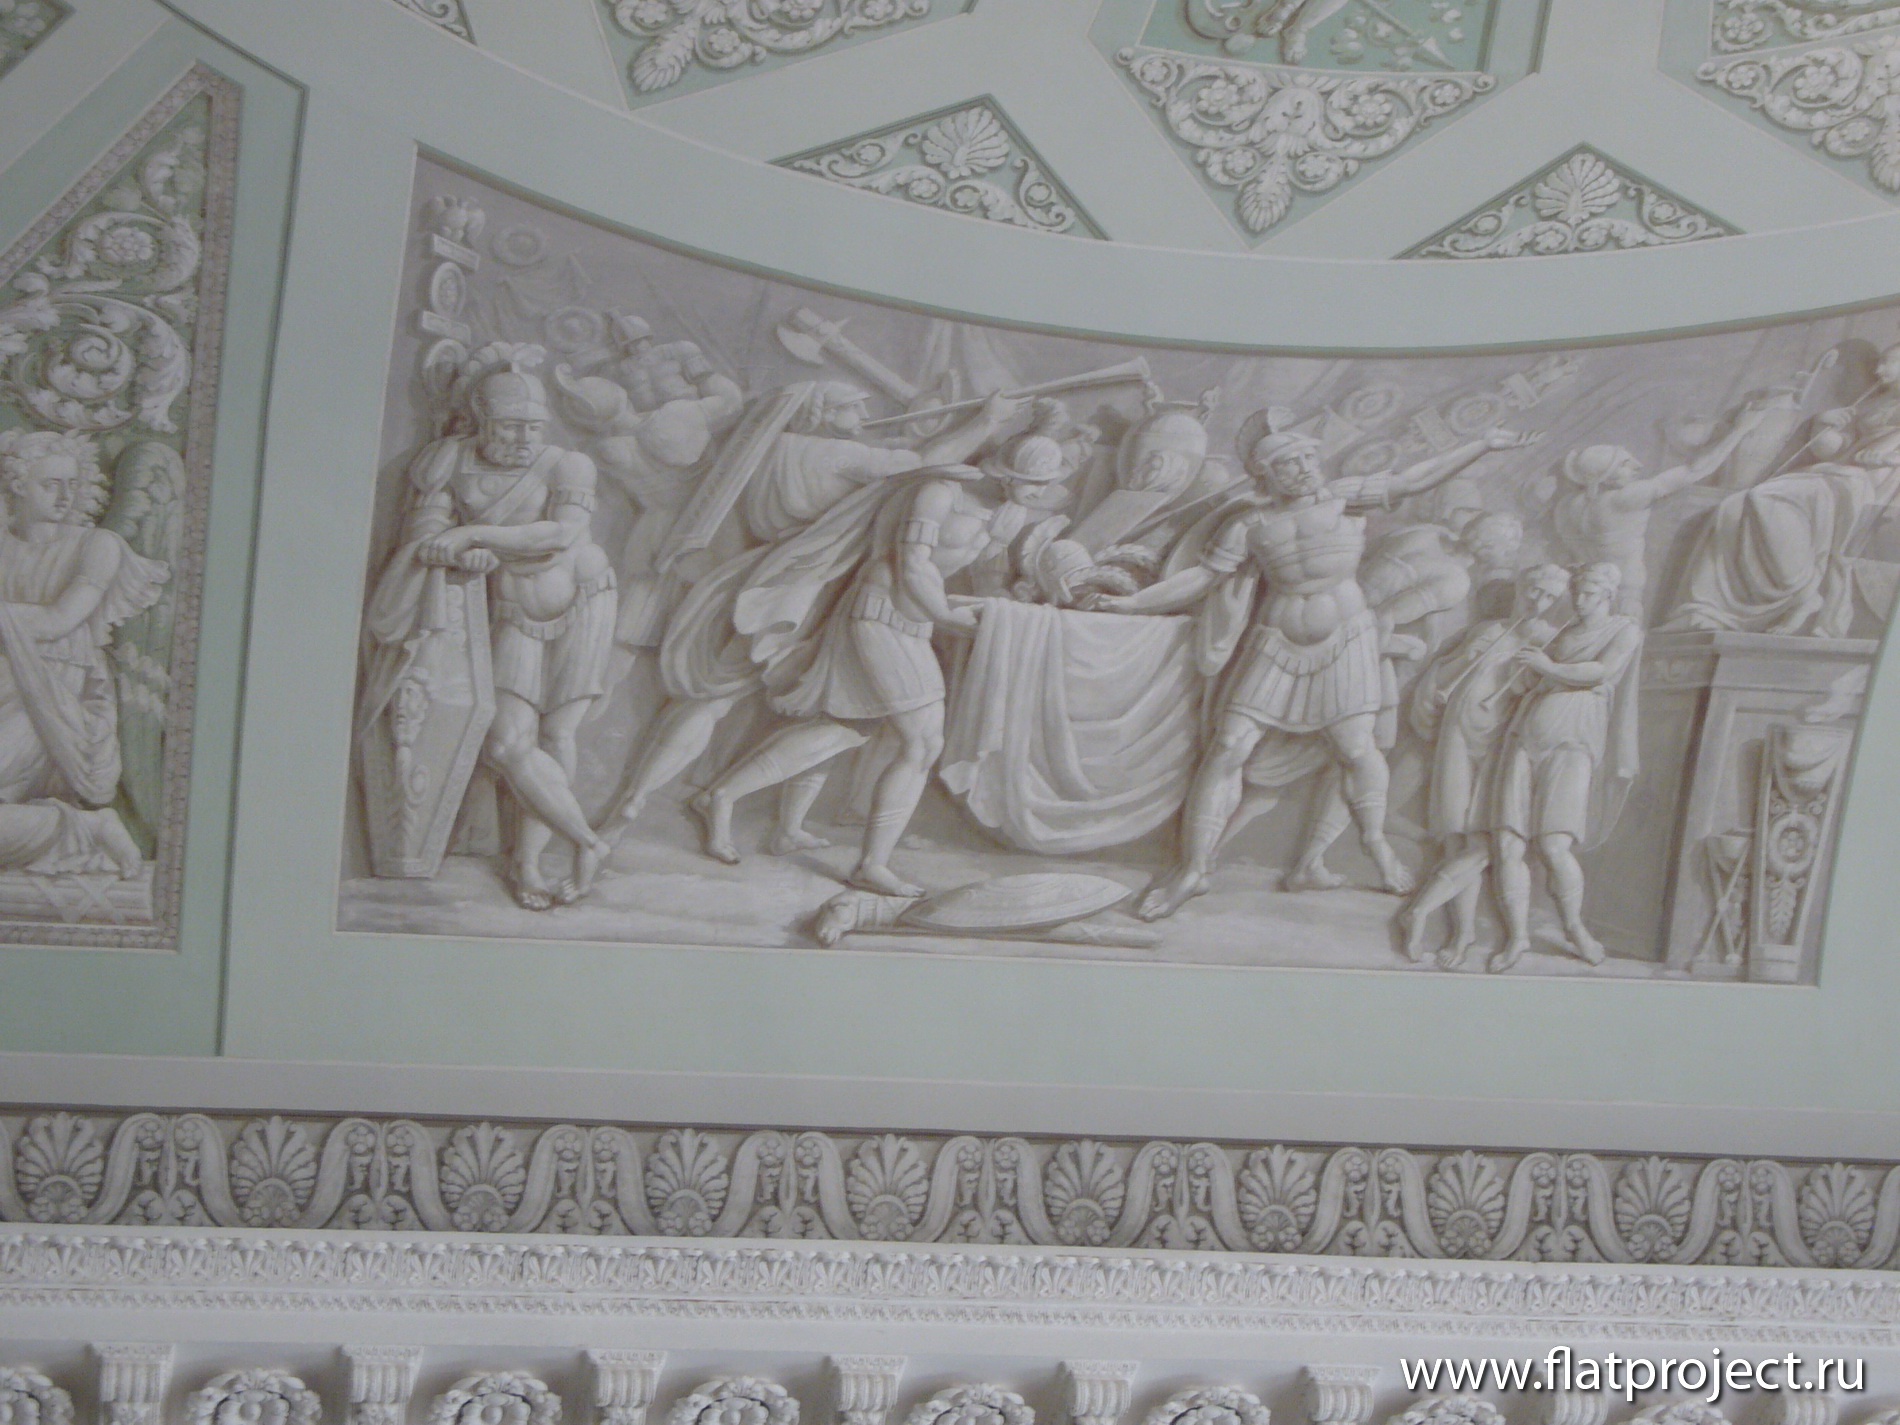 The State Russian museum interiors – photo 24